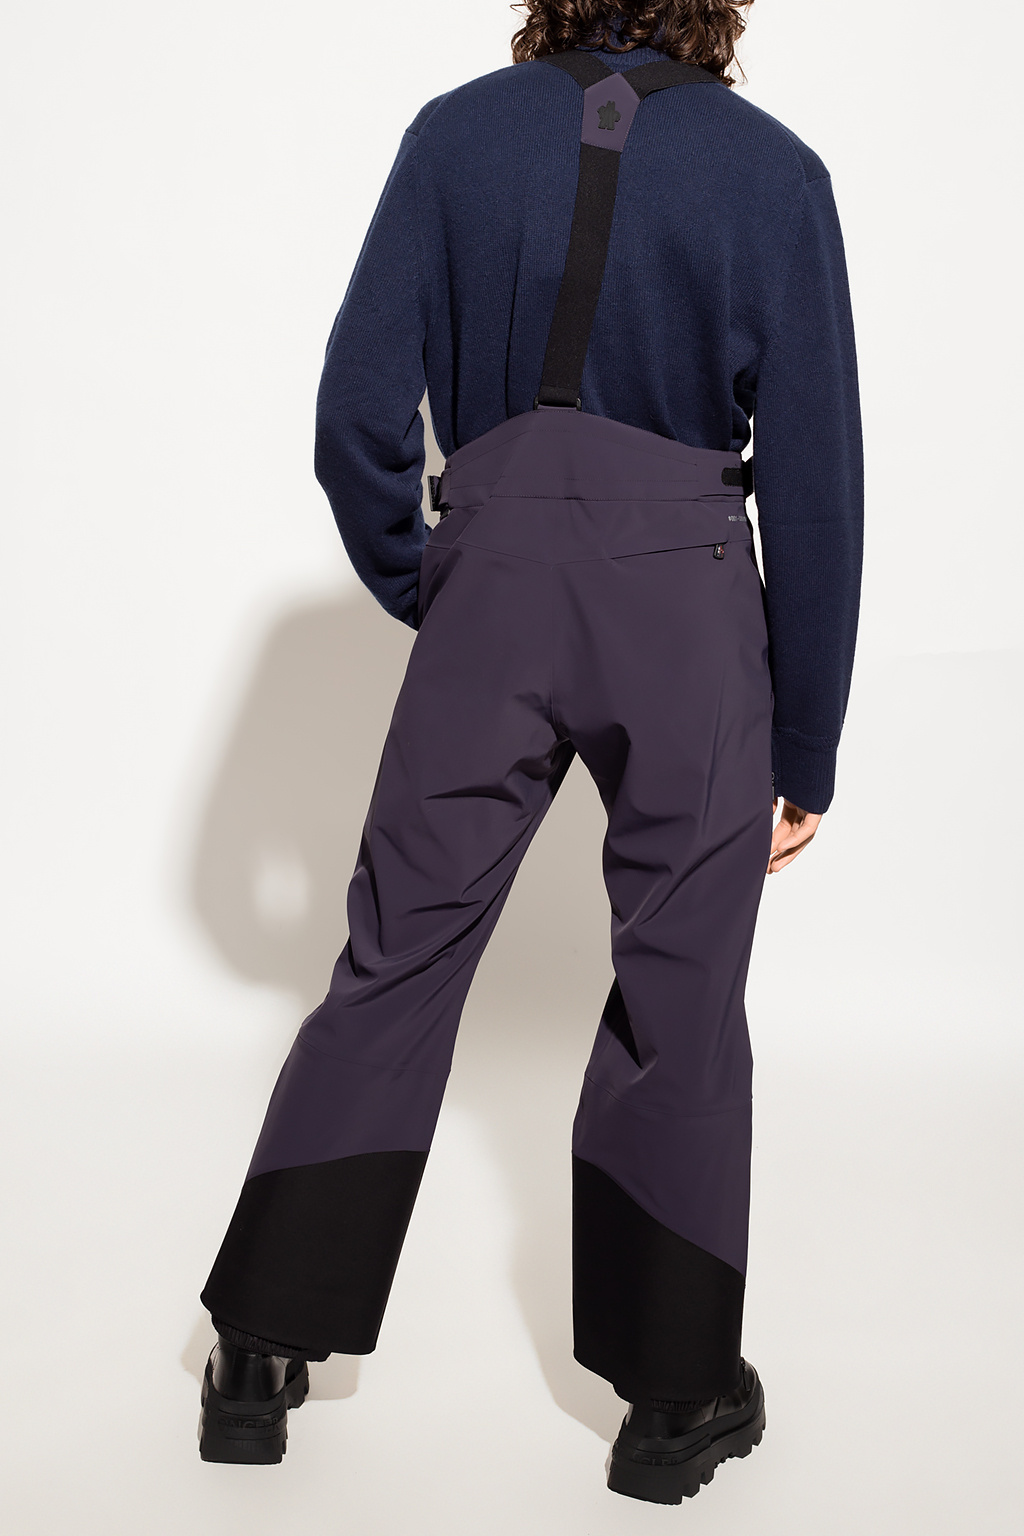 Moncler Grenoble Ski trousers with suspenders